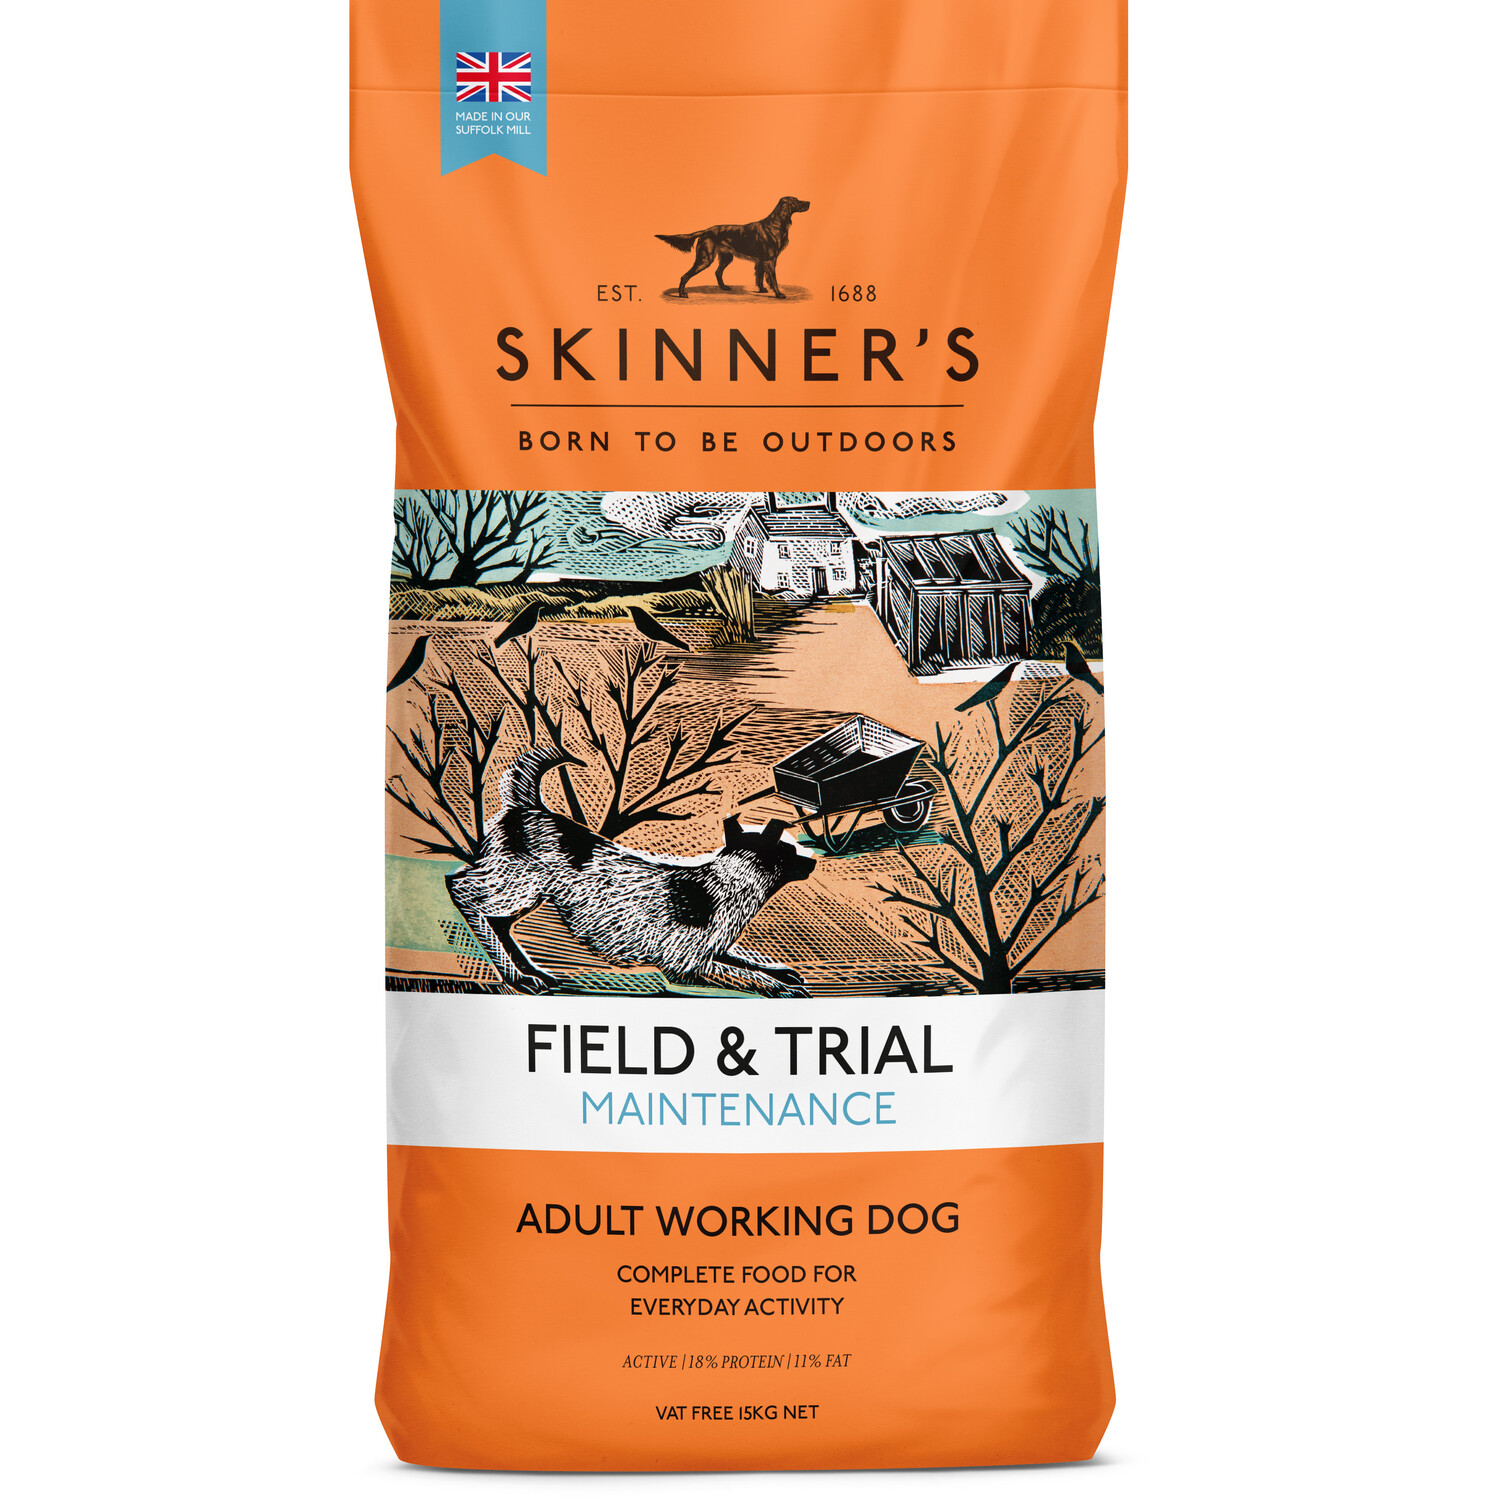 Skinner's Field and Trial Maintenance Adult Working Dog Food 15kg Image